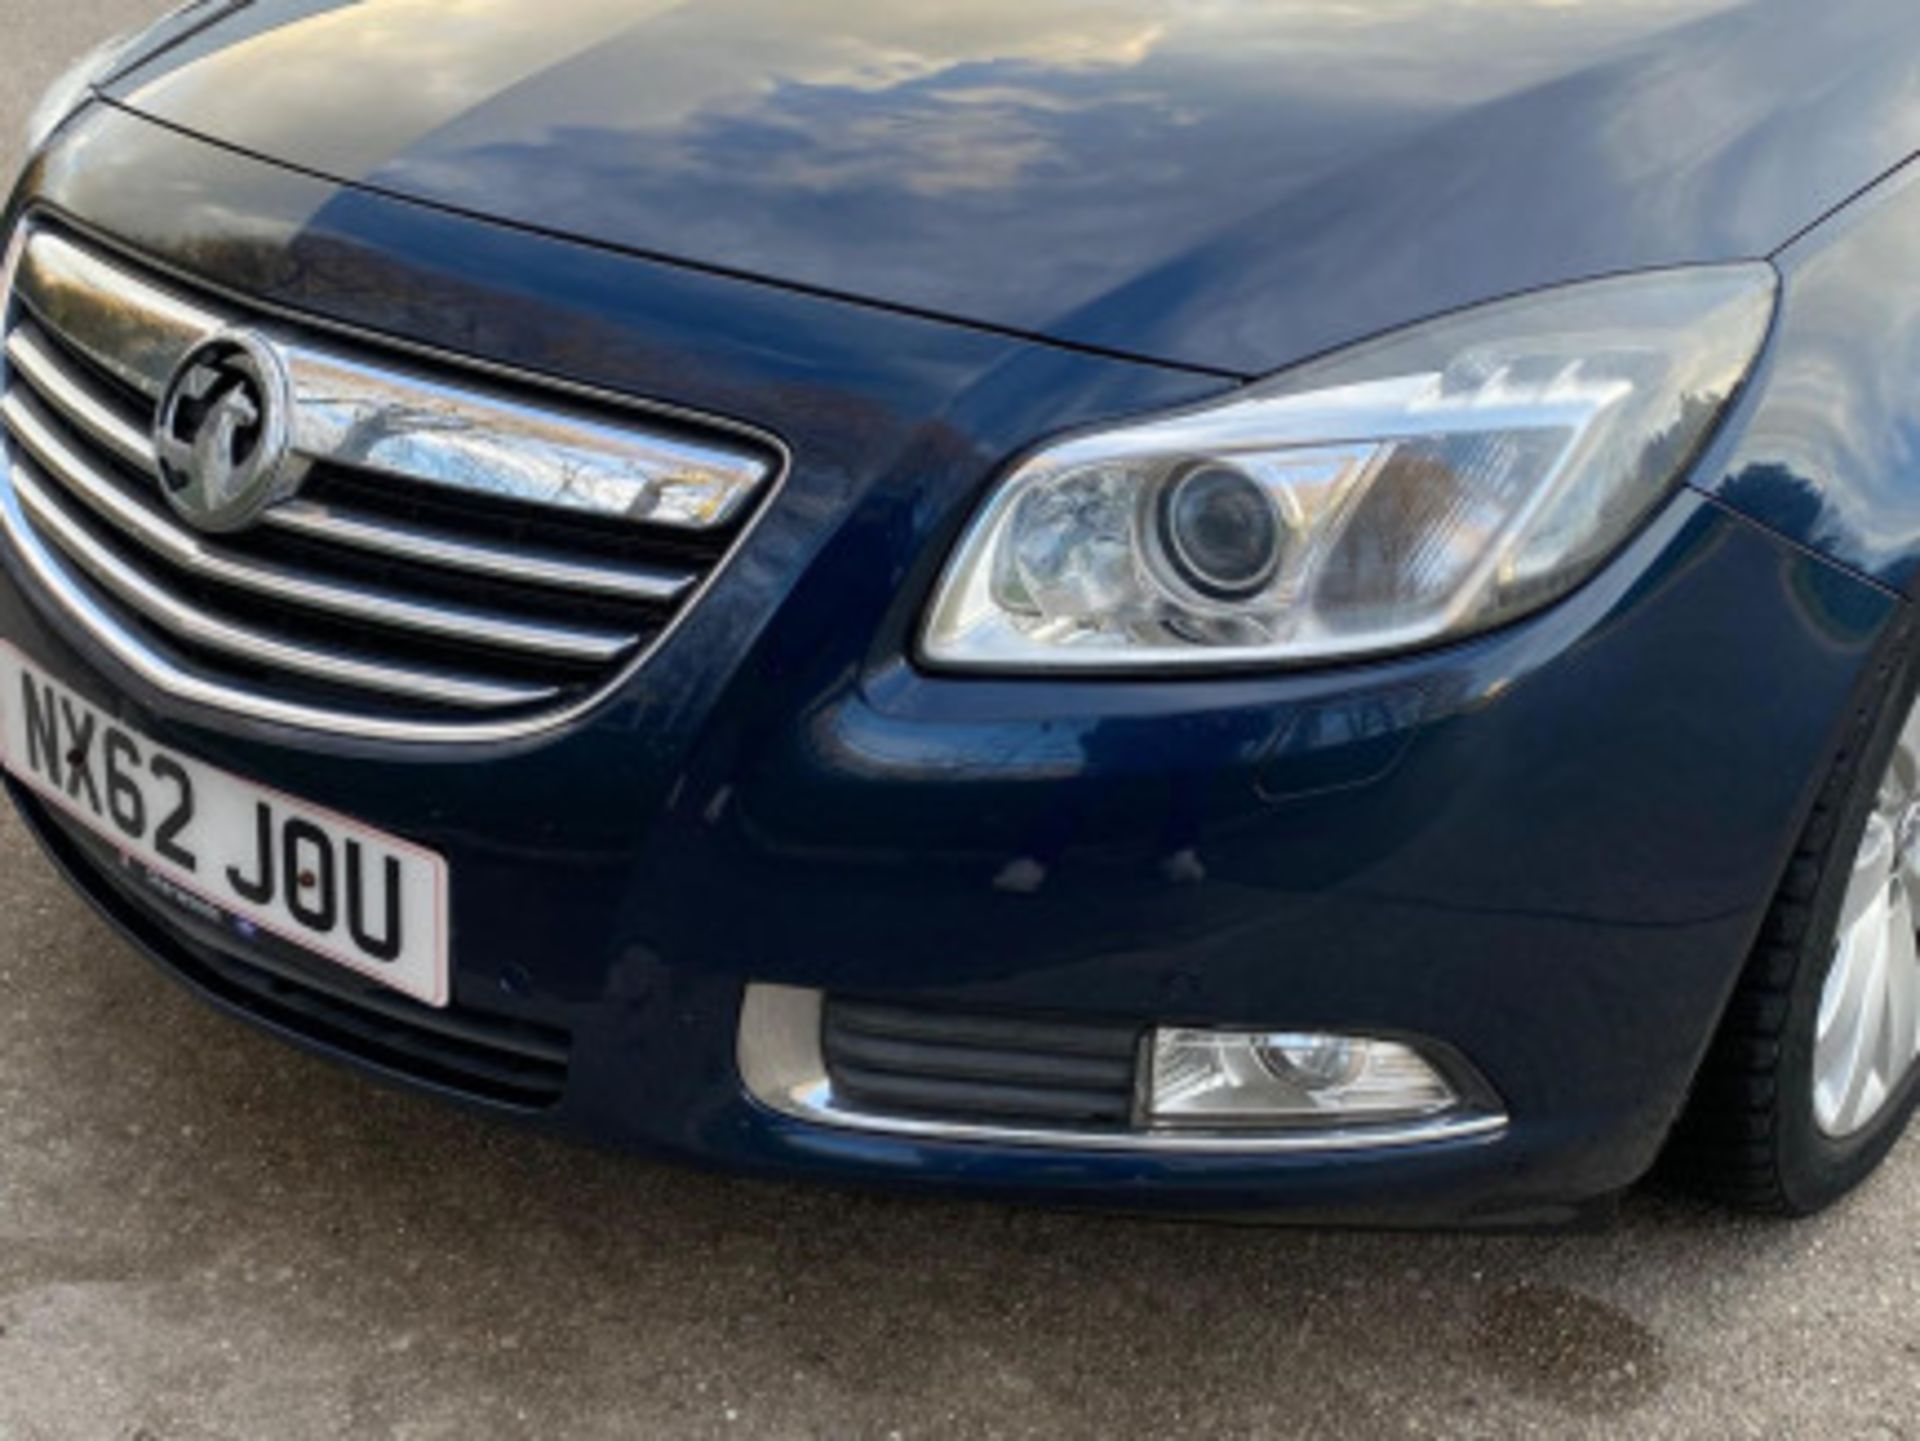 2012 VAUXHALL INSIGNIA 2.0 CDTI ELITE AUTO EURO 5 - DISCOVER EXCELLENCE >>--NO VAT ON HAMMER--<< - Image 40 of 120